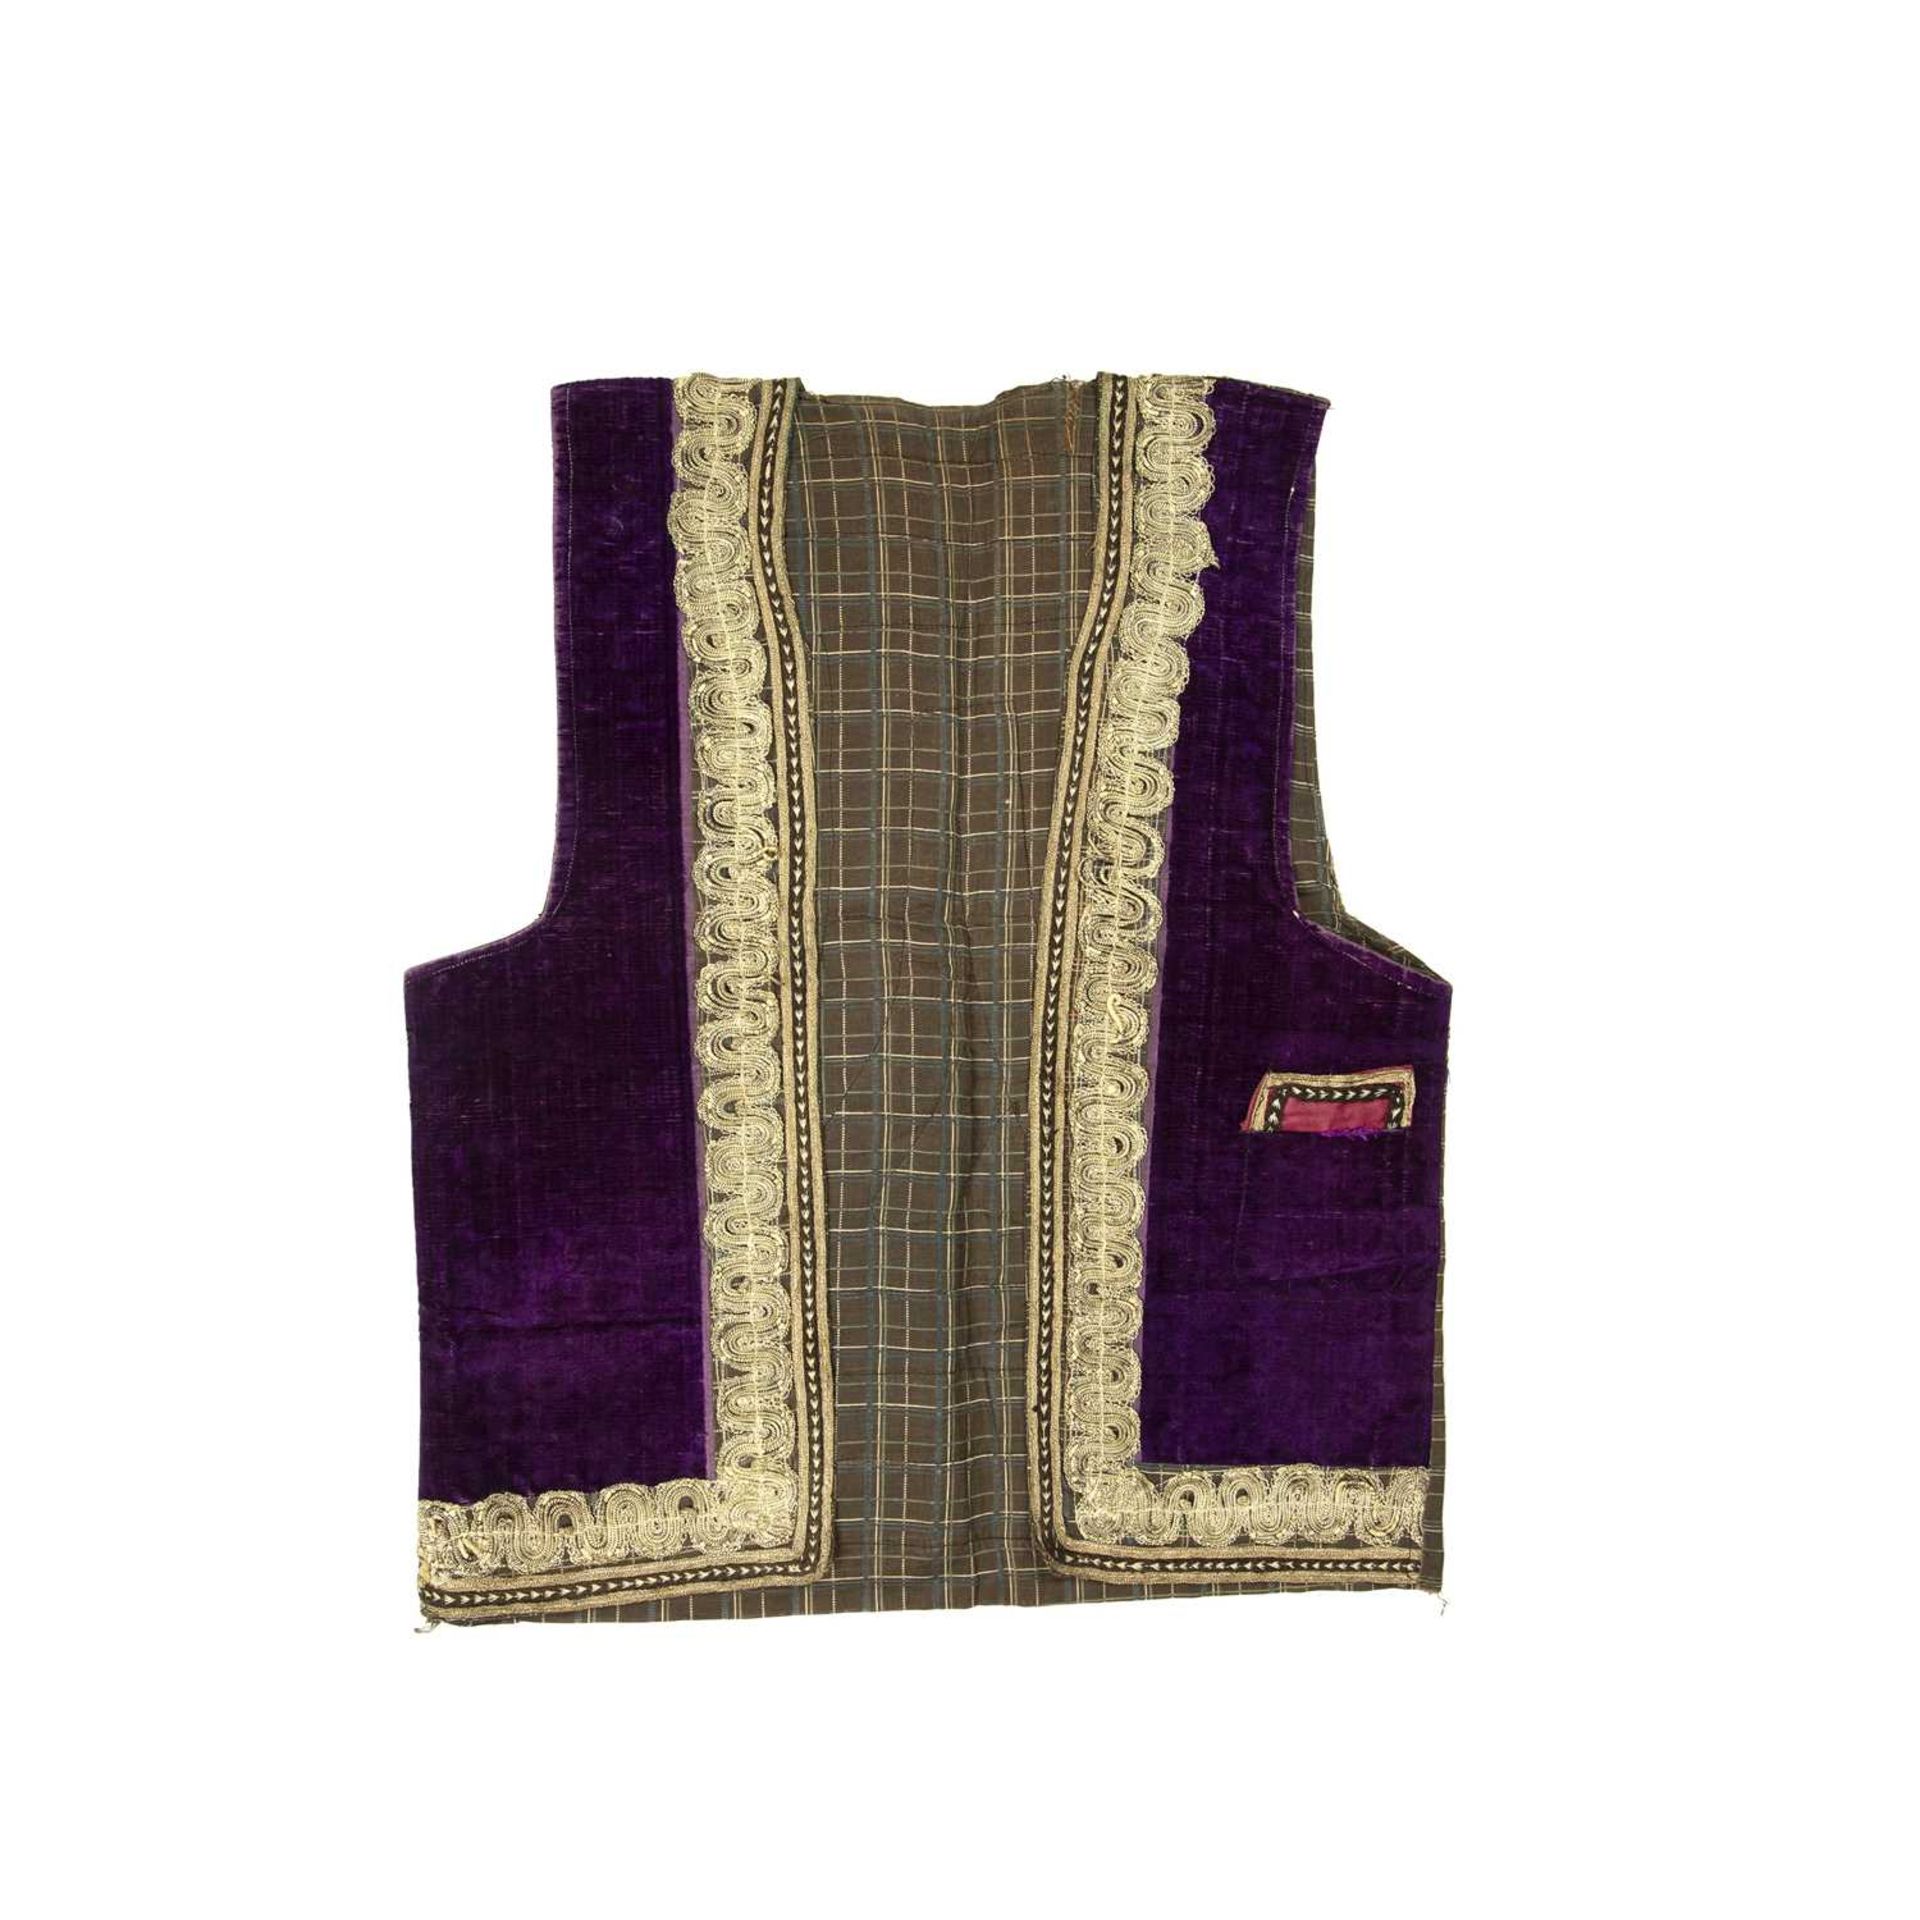 Purple velvet waistcoat Persian or Ottoman with a metal thread border.Overall wear, consistent